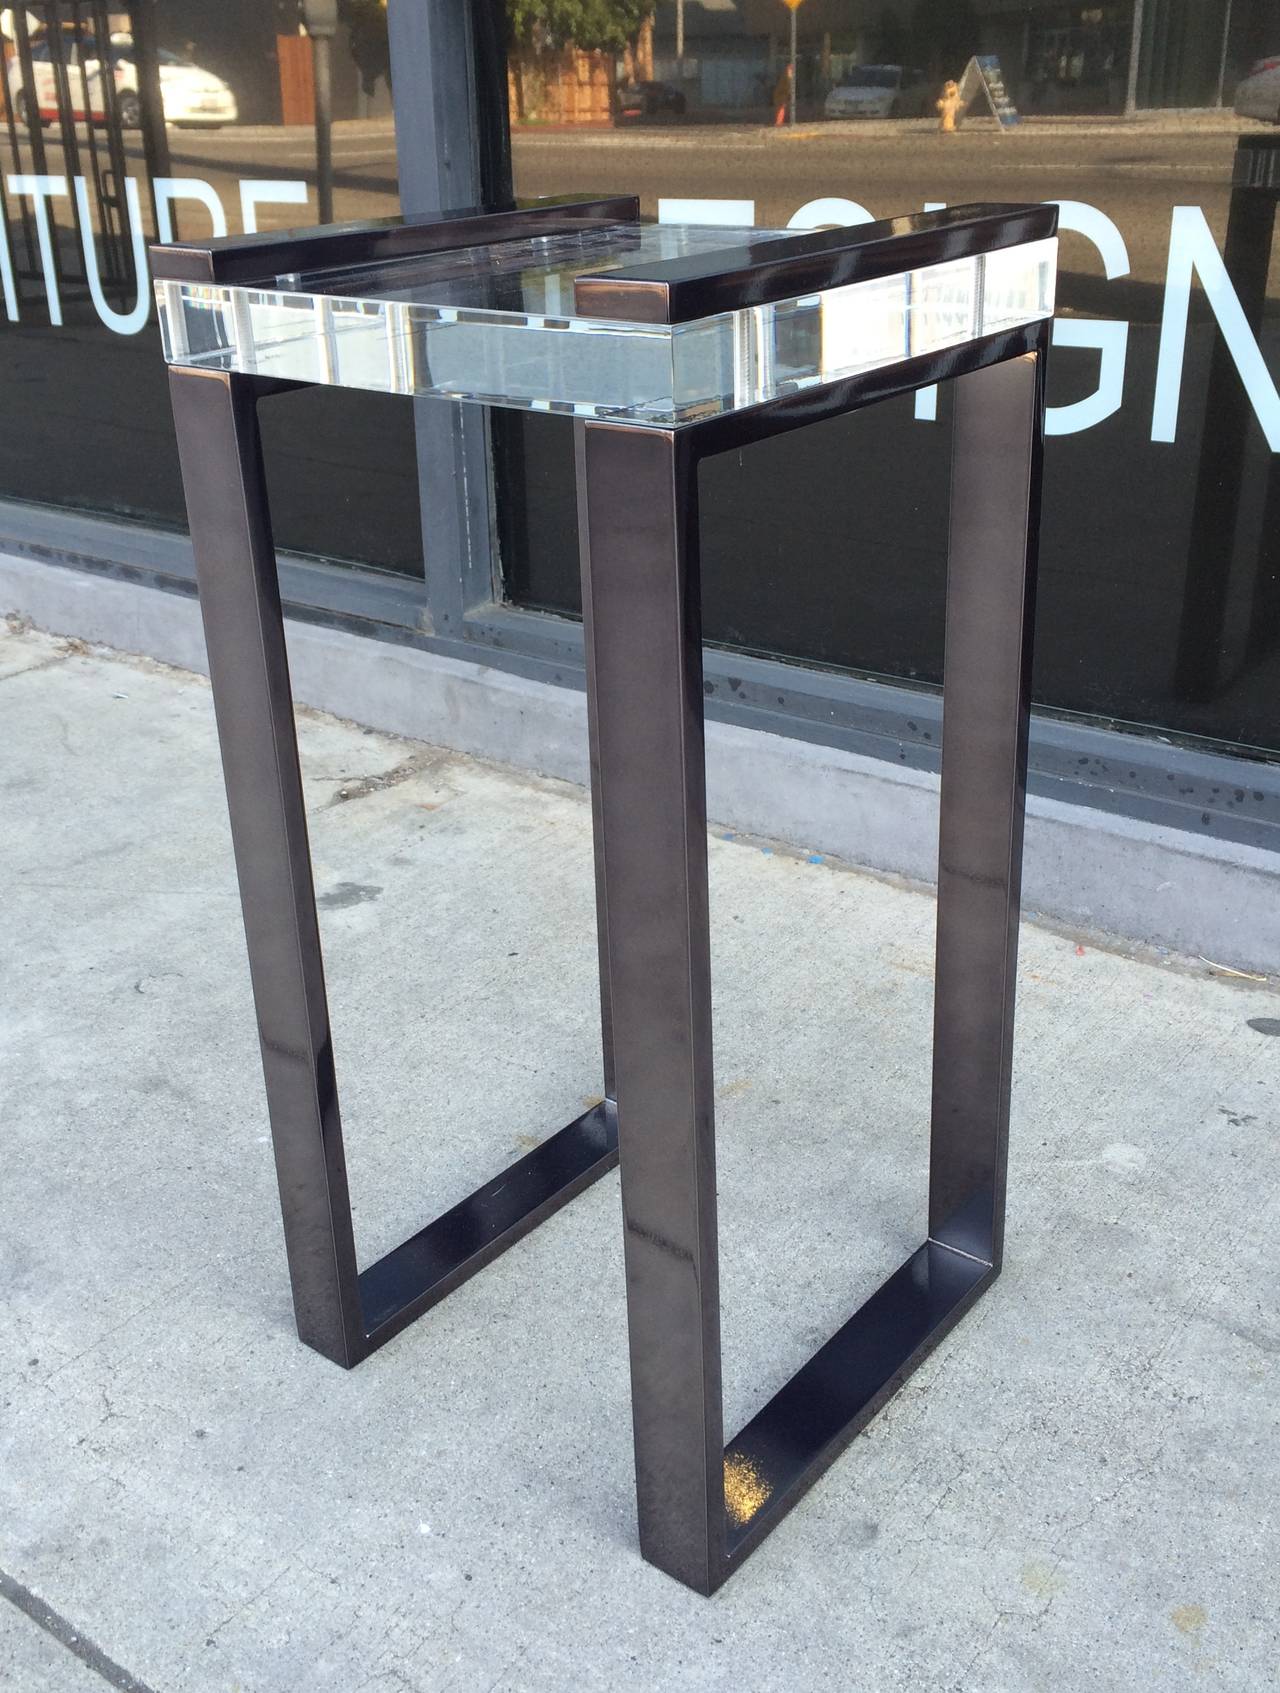 Currently we have three sets ready to ship.
One set in polished nickel, one set in black nickel and one set in polished brass.
Stunning pair of Lucite and black nickel side tables designed and manufactured by Charles Hollis Jones as part of his